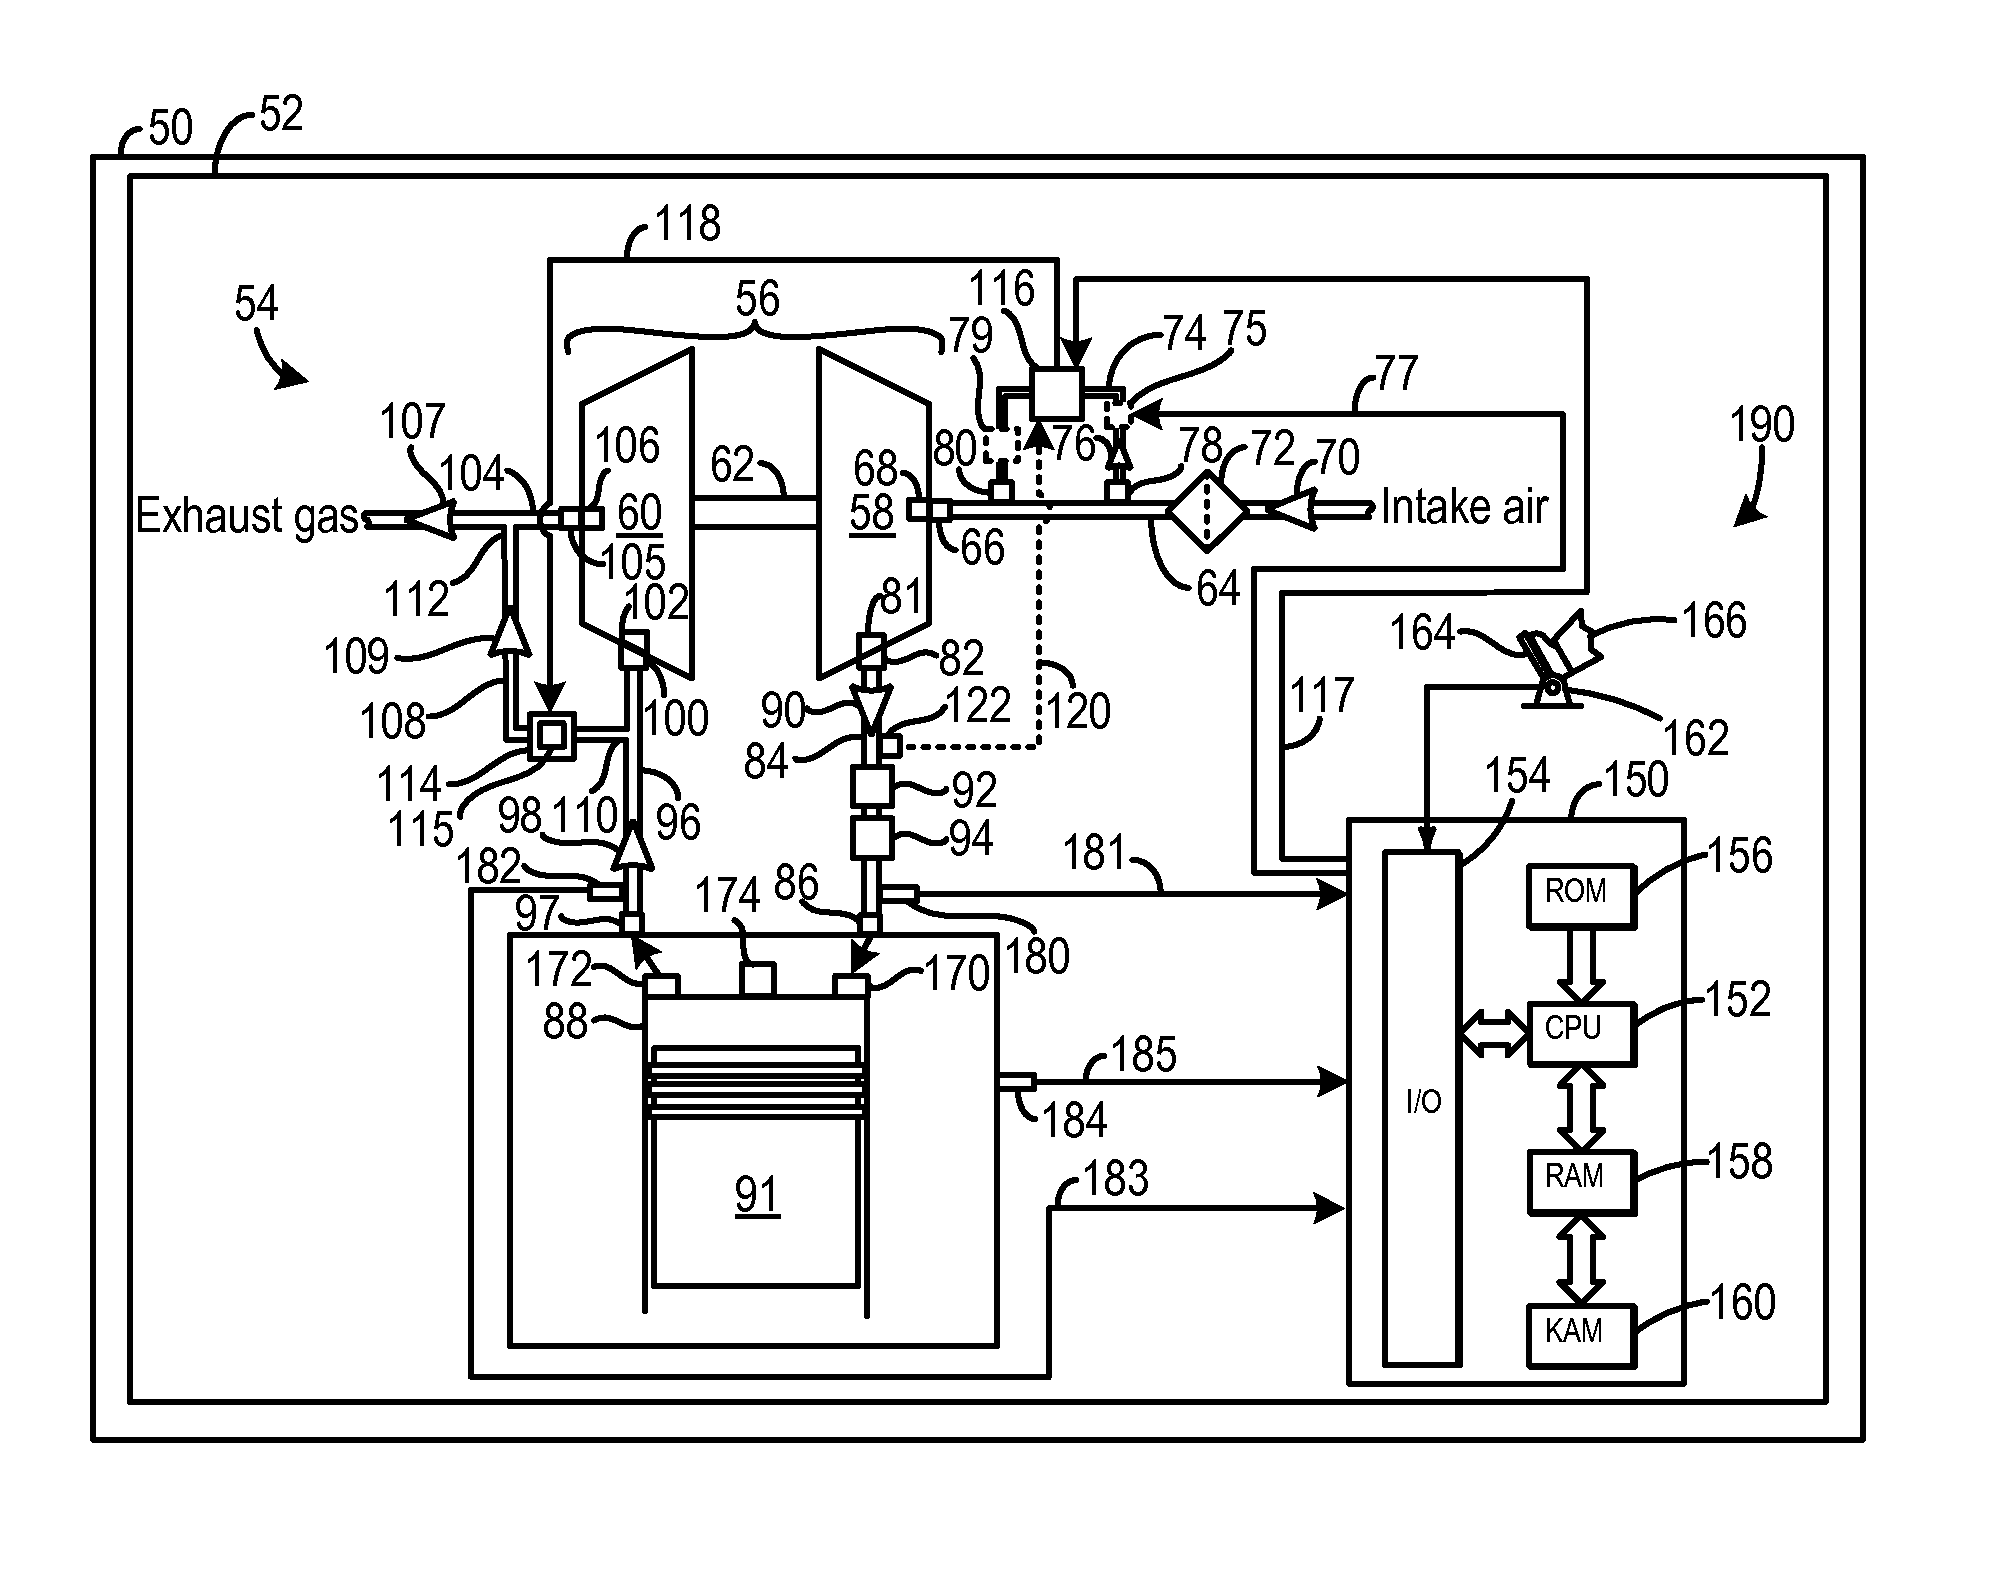 Turbocharger system having an air-cooled solenoid valve